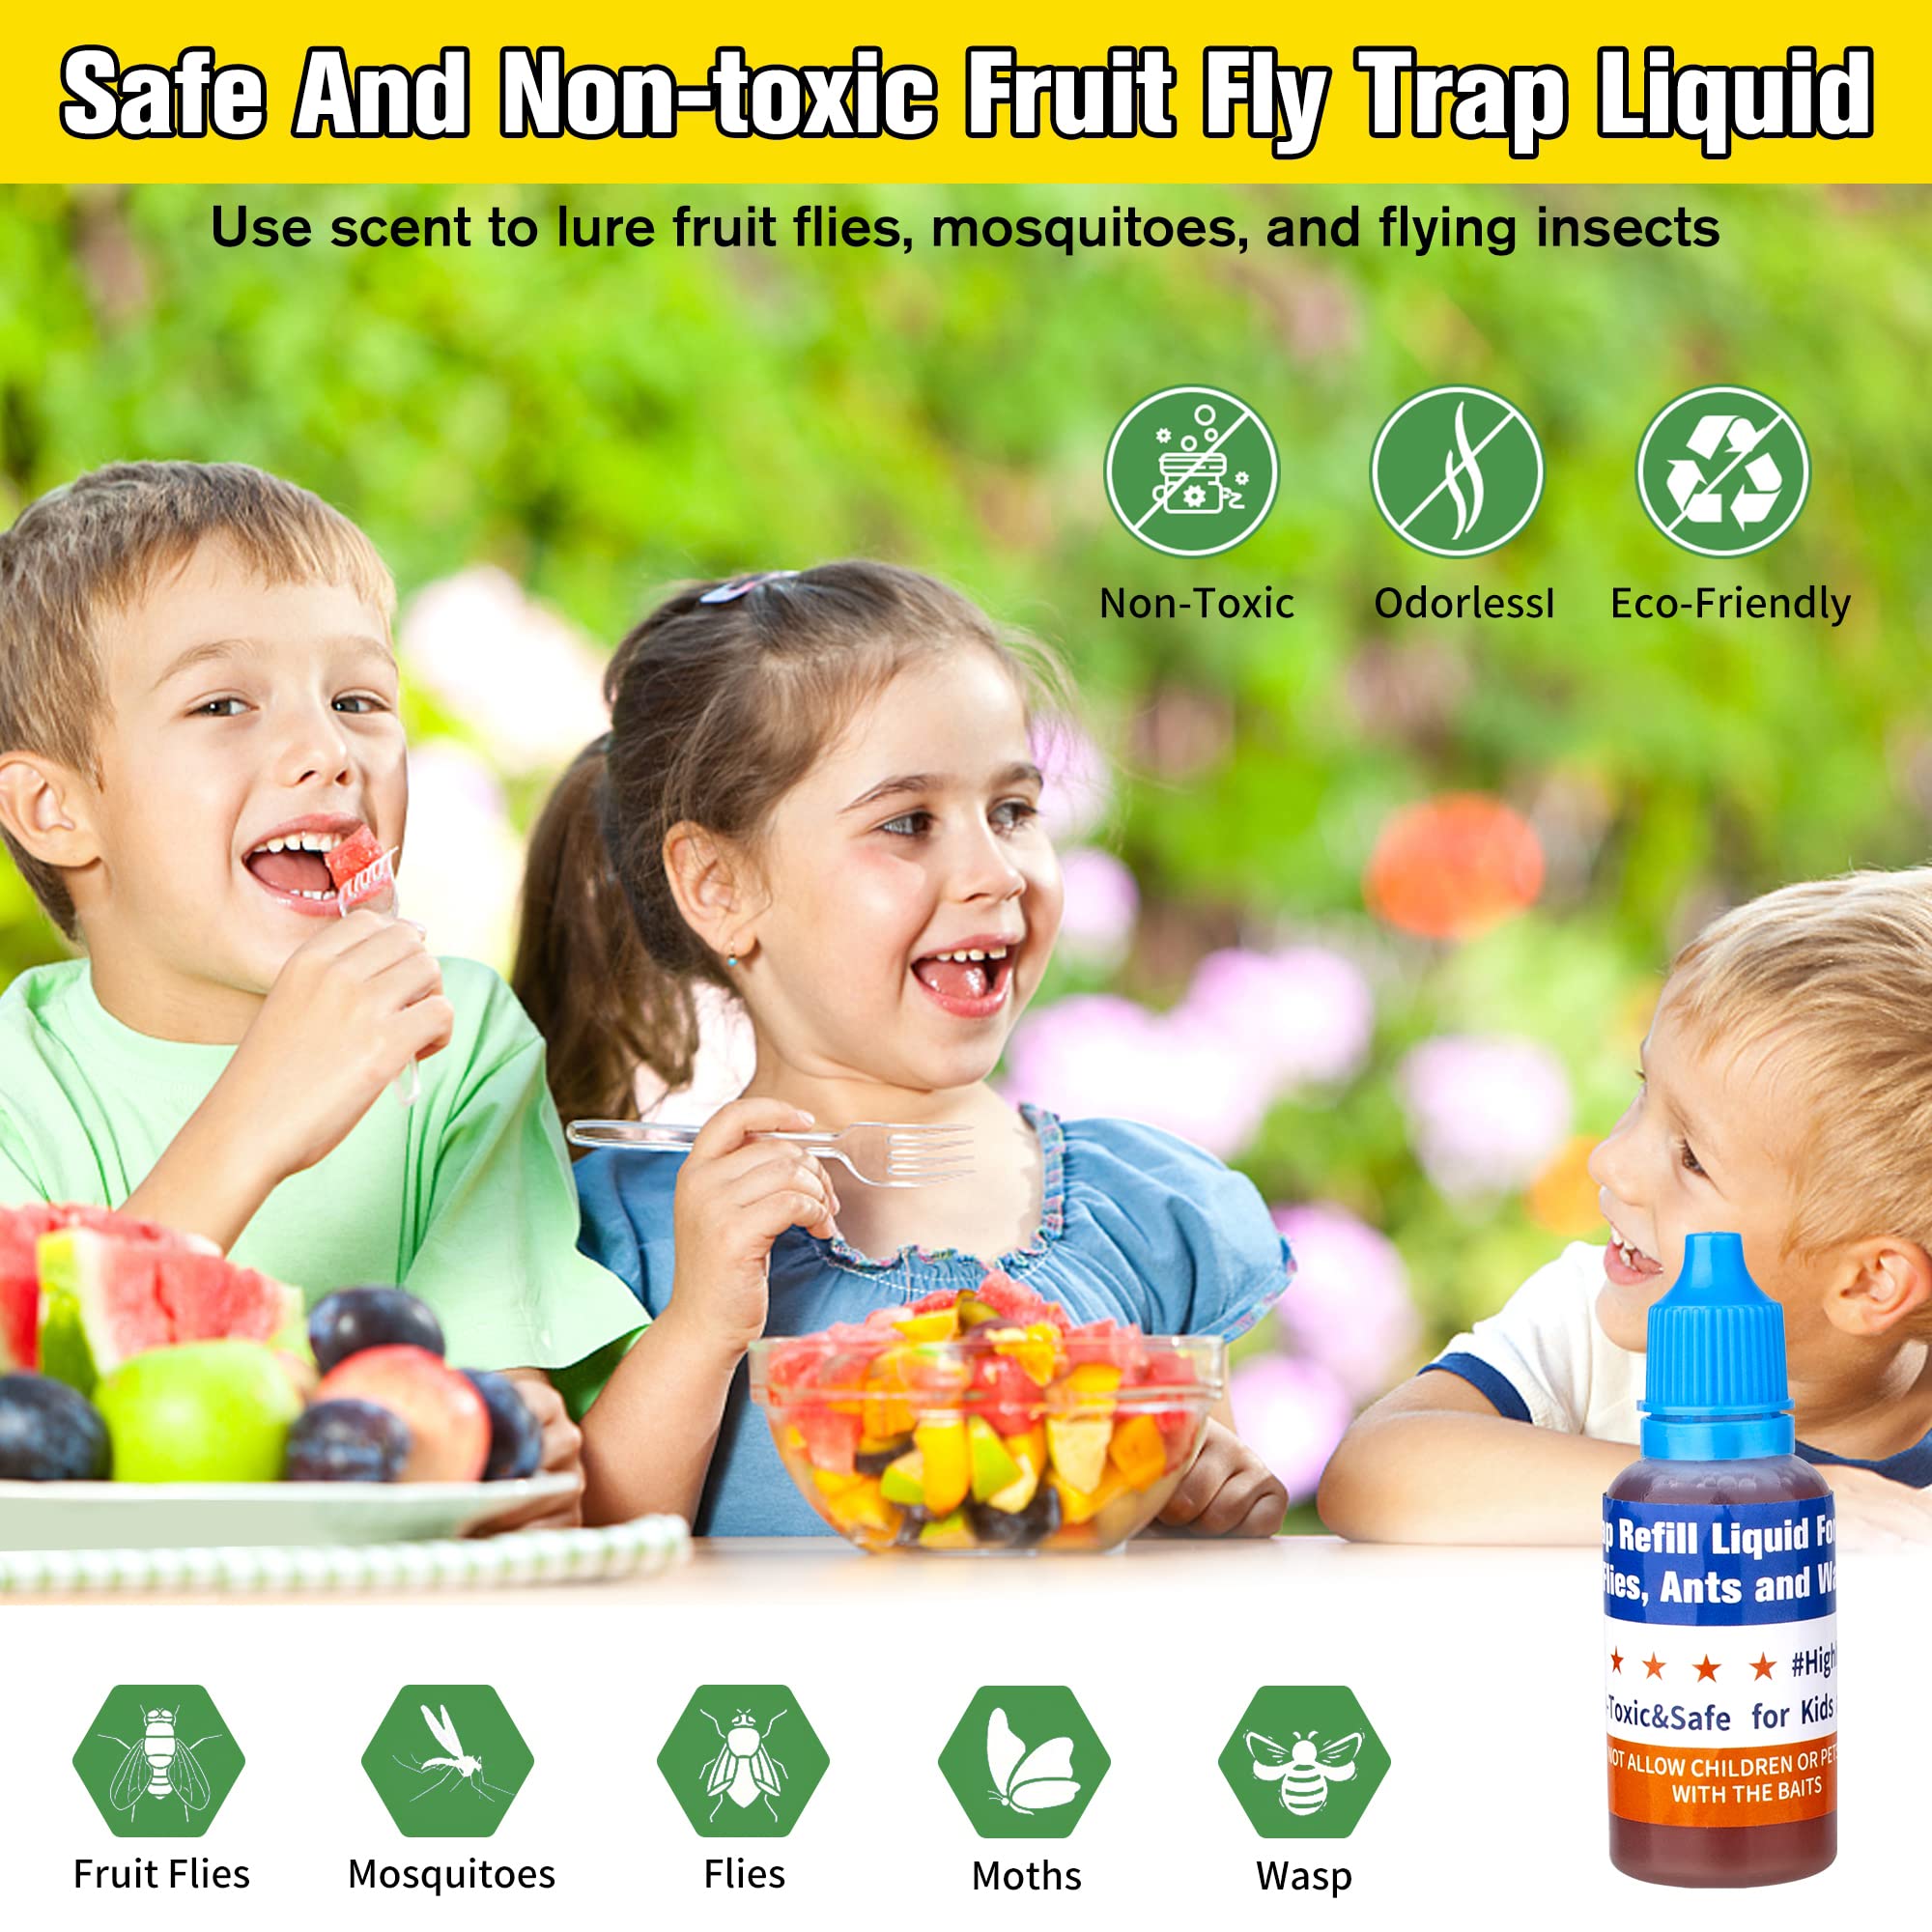 Protecker Fruit Fly Trap Refill Liquid Only,2023 Fruit Fly Traps for Indoors,Fruit Fly Killer for Home,Kitchen,Ready-to-Use Fly Trap Refill Liquid,Fruit Fly Trap Bait Refill for Indoors(4 Pack)